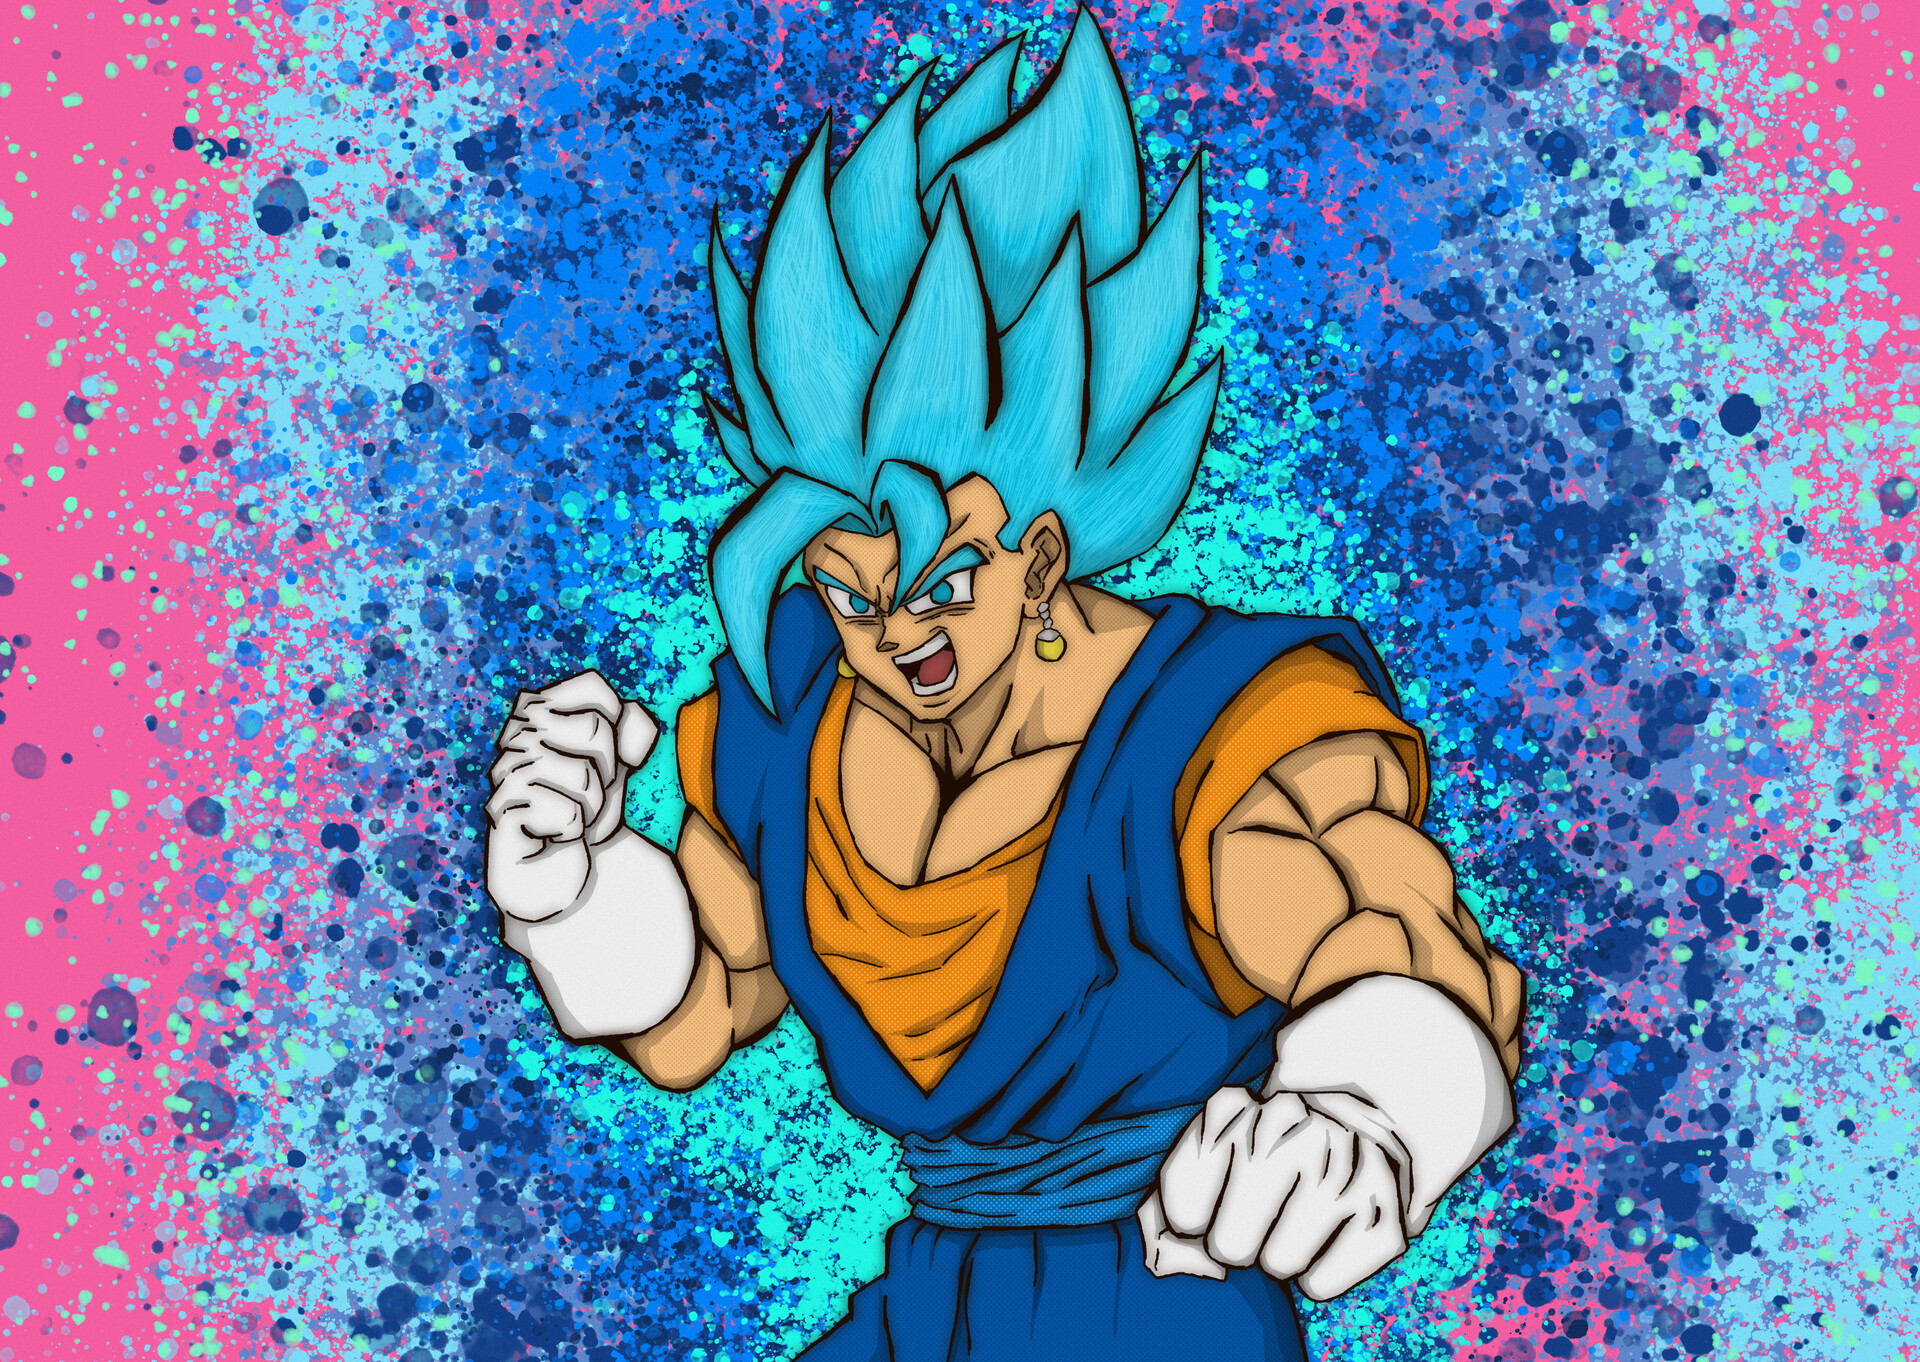 https://cdnb.artstation.com/p/assets/images/images/026/418/957/large/zaid-shahid-vegito-fighterz-complete-small.jpg?1588725135